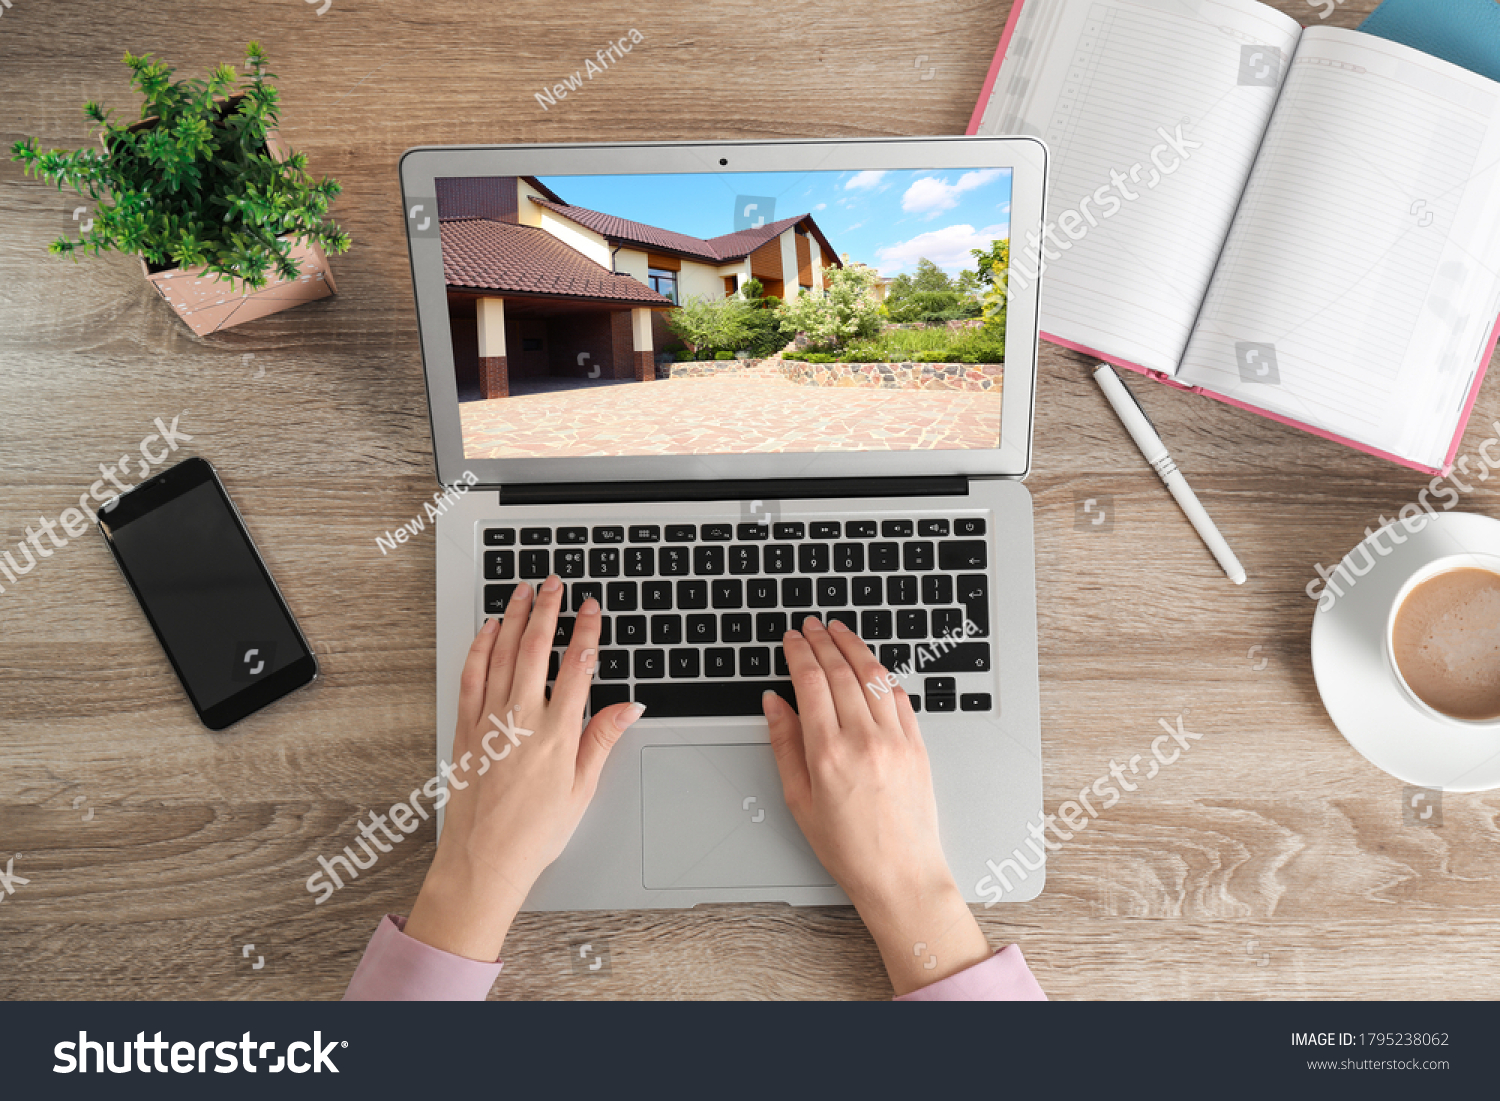 Woman choosing new house online using laptop or real estate agent working at table, top view #1795238062